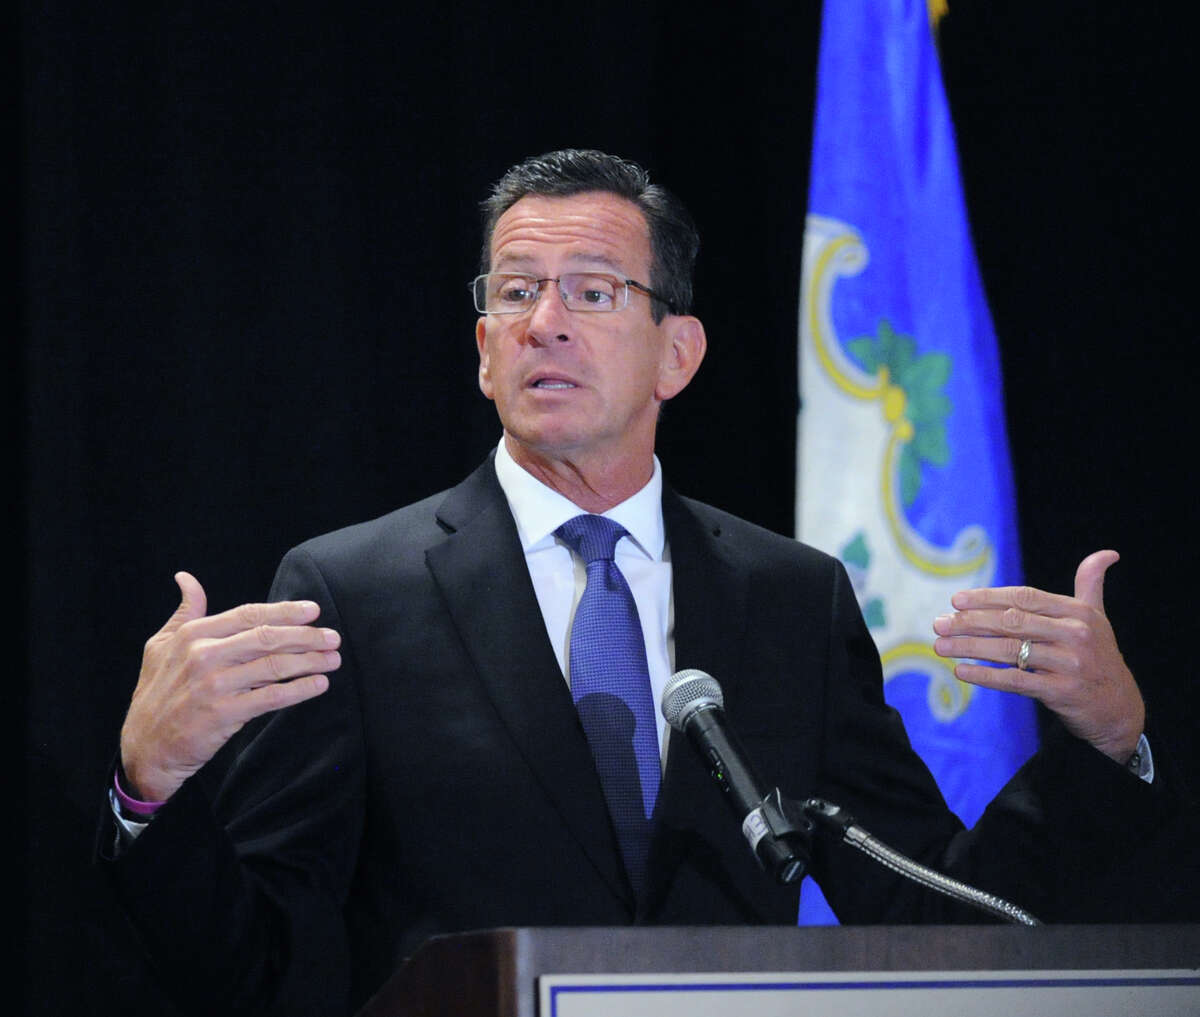 Gov. Dannel P. Malloy spoke during the 28th annual meeting of the Stamford Chamber of Commerce at the Stamford Marriott Hotel & Spa, Stamford, Conn., Thursday, Oct. 1, 2015.